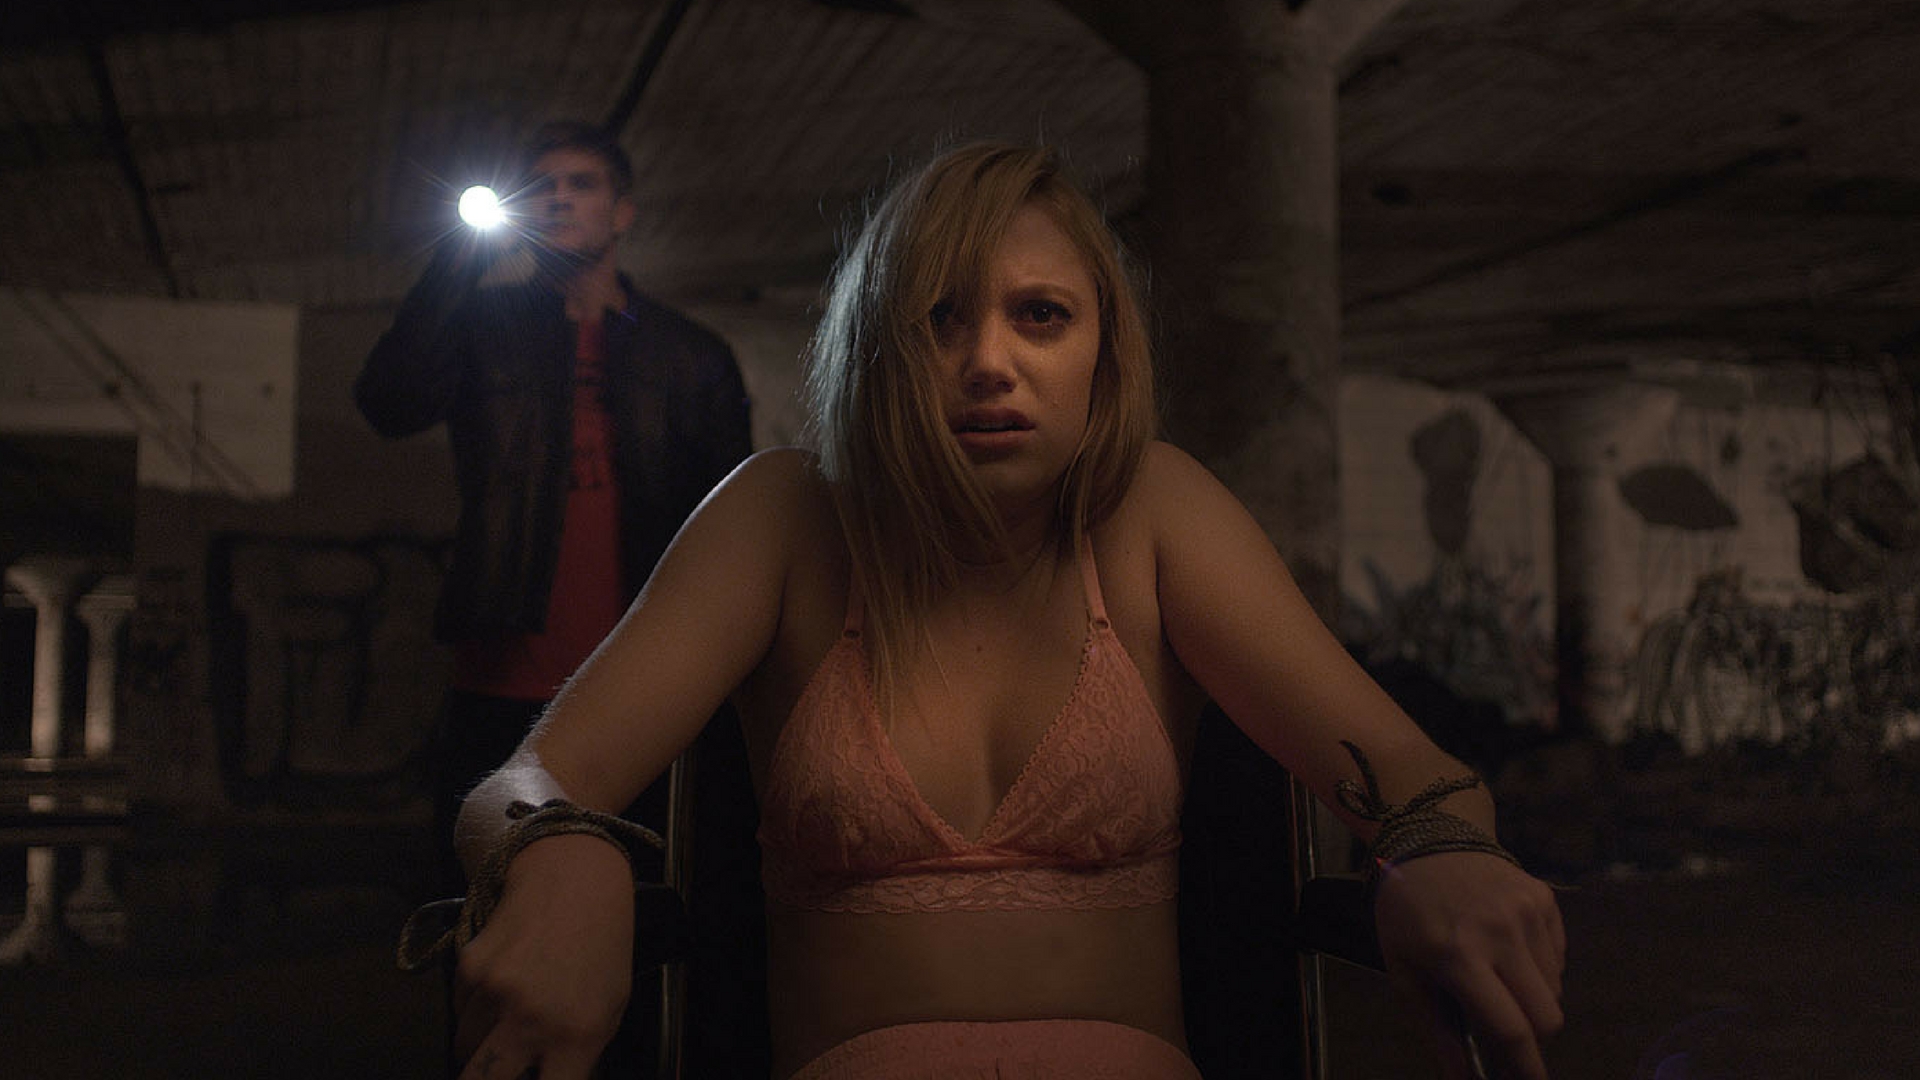 Review – “It Follows” is as Quiet as it is Terrifying